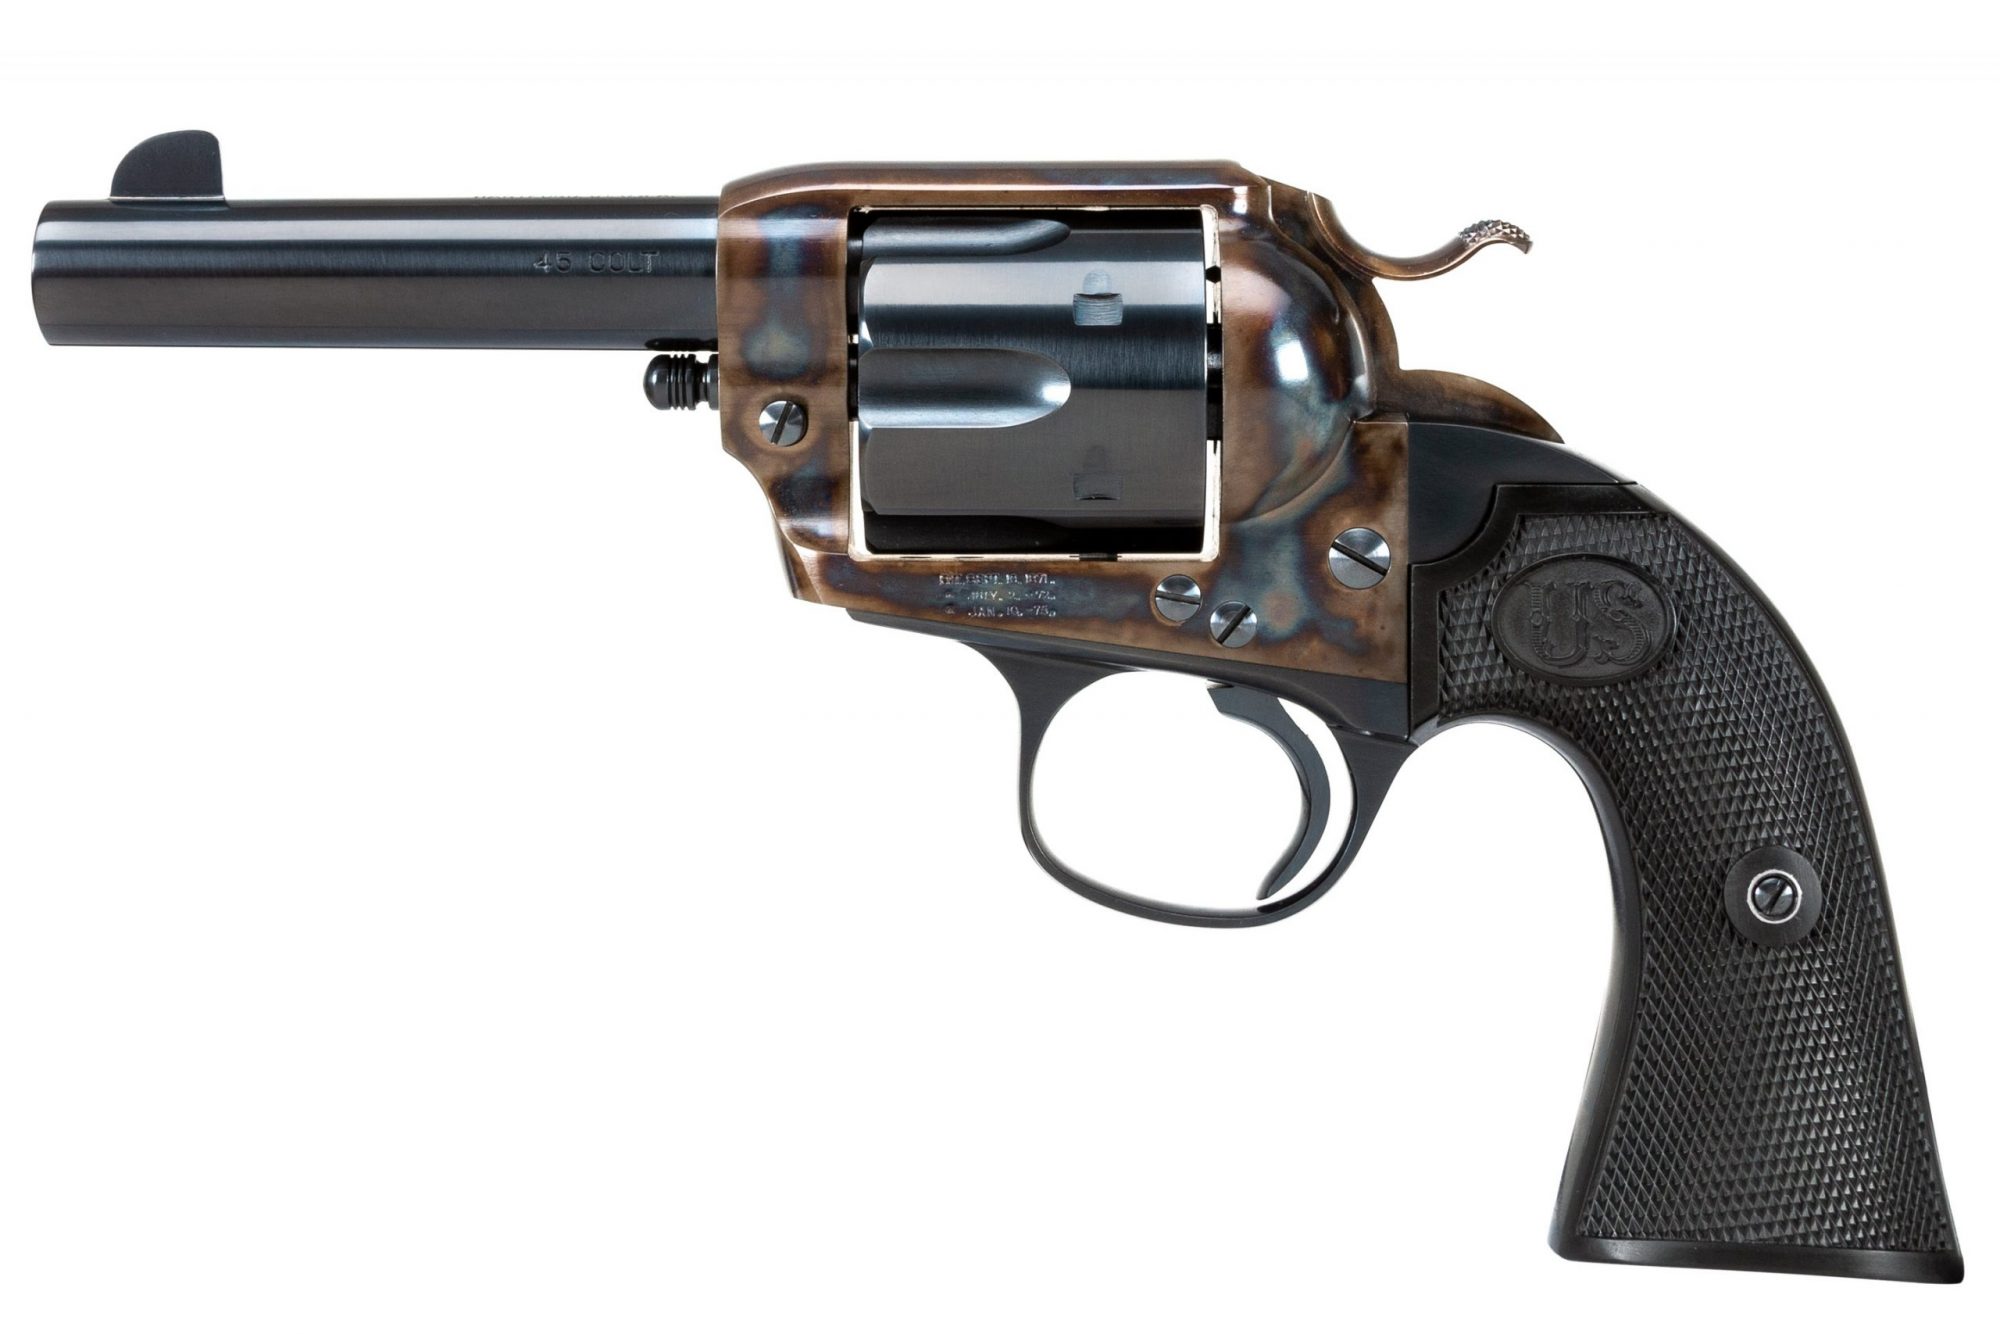 Photo of a Turnbull Finished U.S. Firearms SAA Bisley, featuring bone charcoal color case hardening